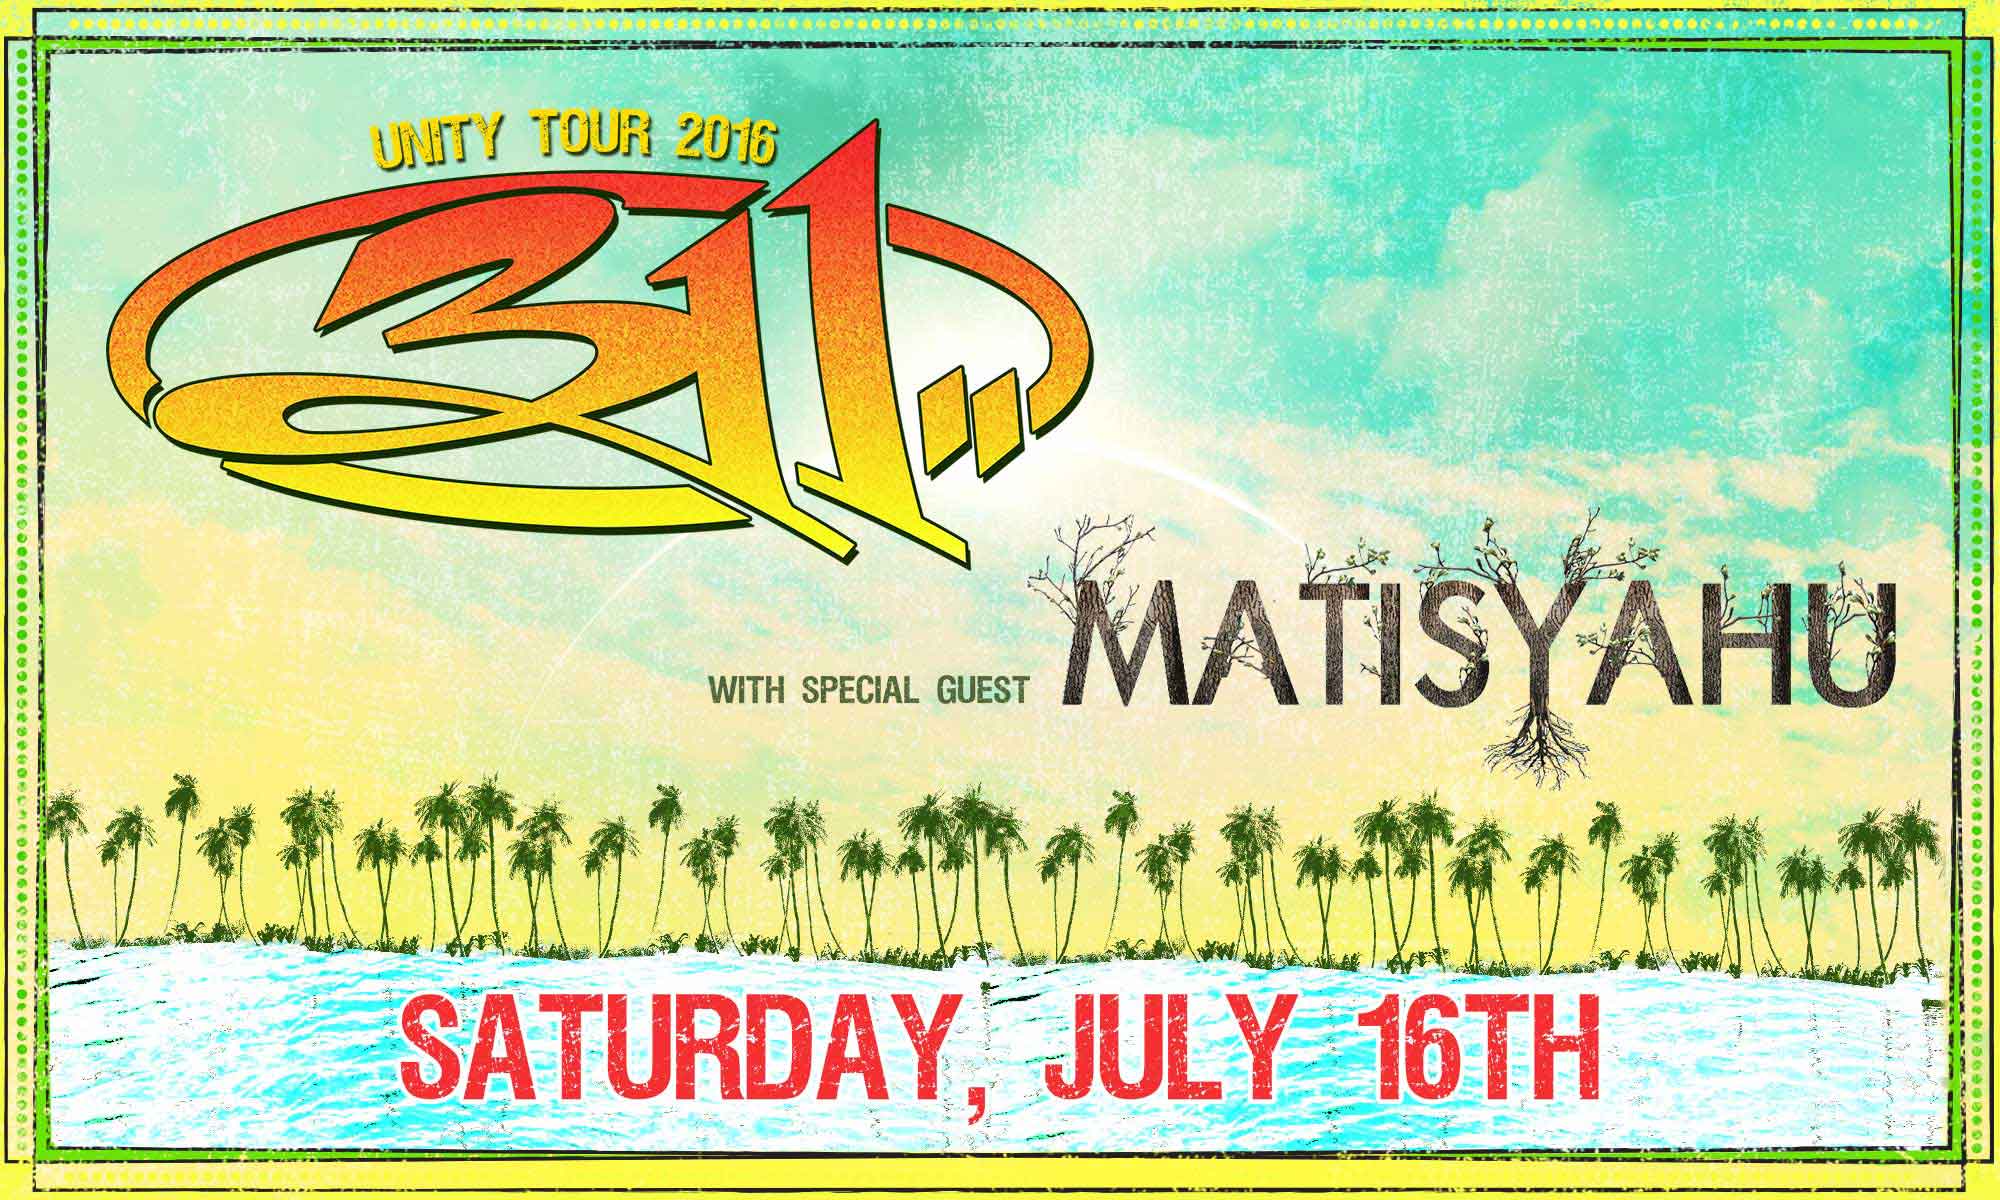 311: Unity Tour 2016 at Coney Island Amphitheater on 07-16-16